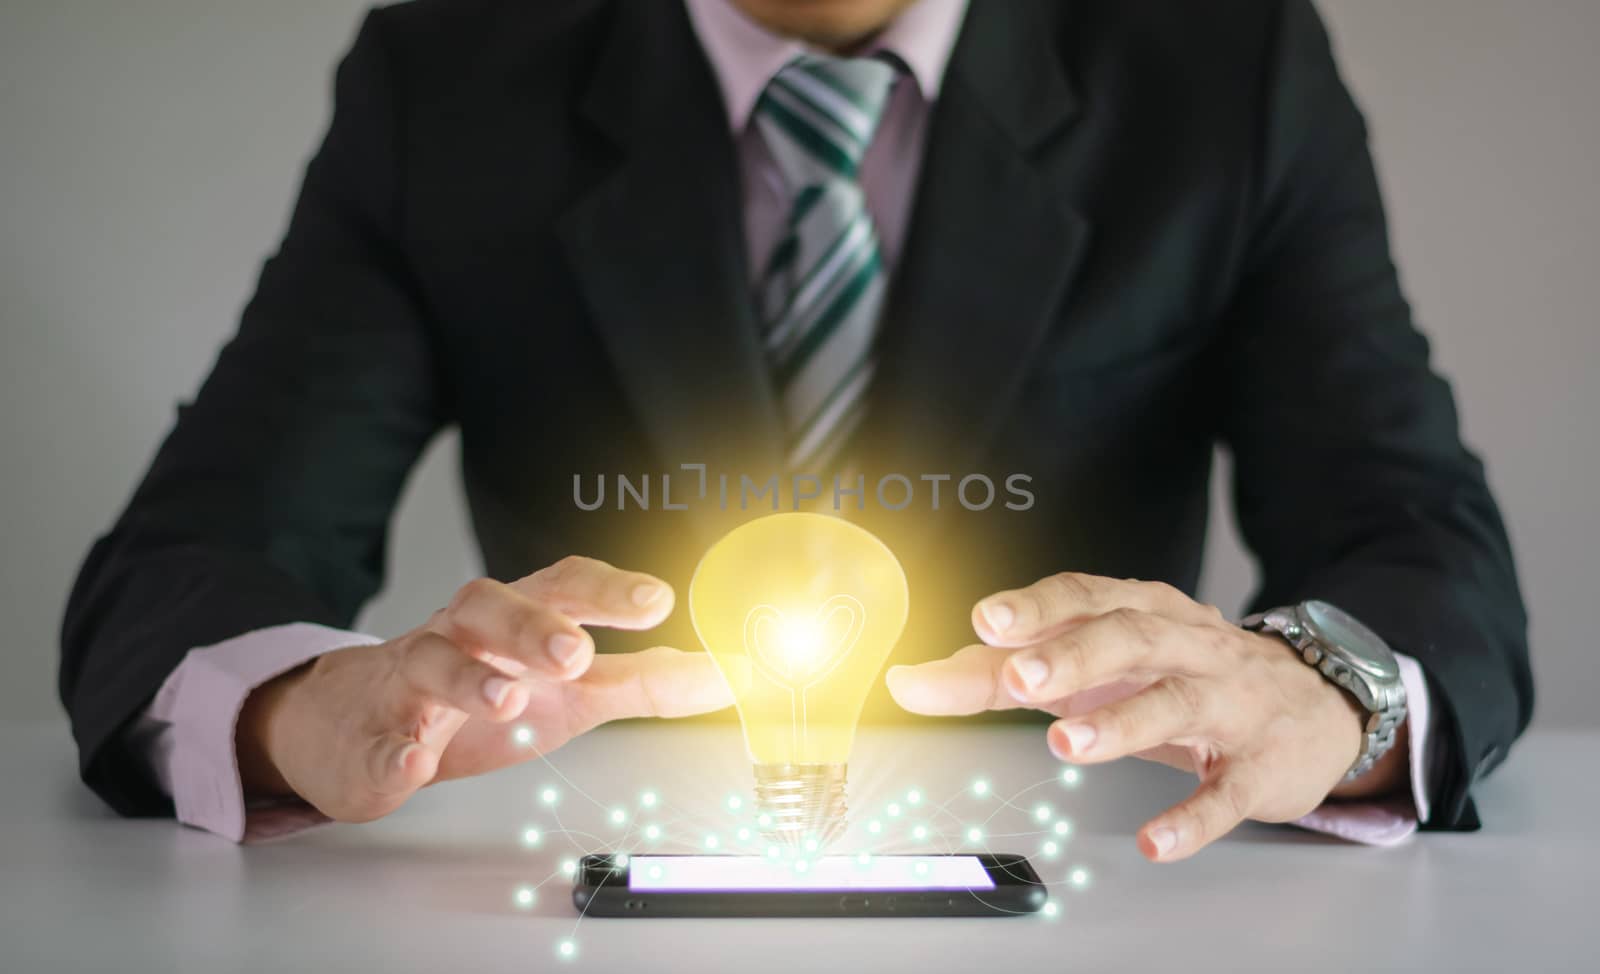 Light bulb new ideas with innovative technology solution concepts hands of the businessman.